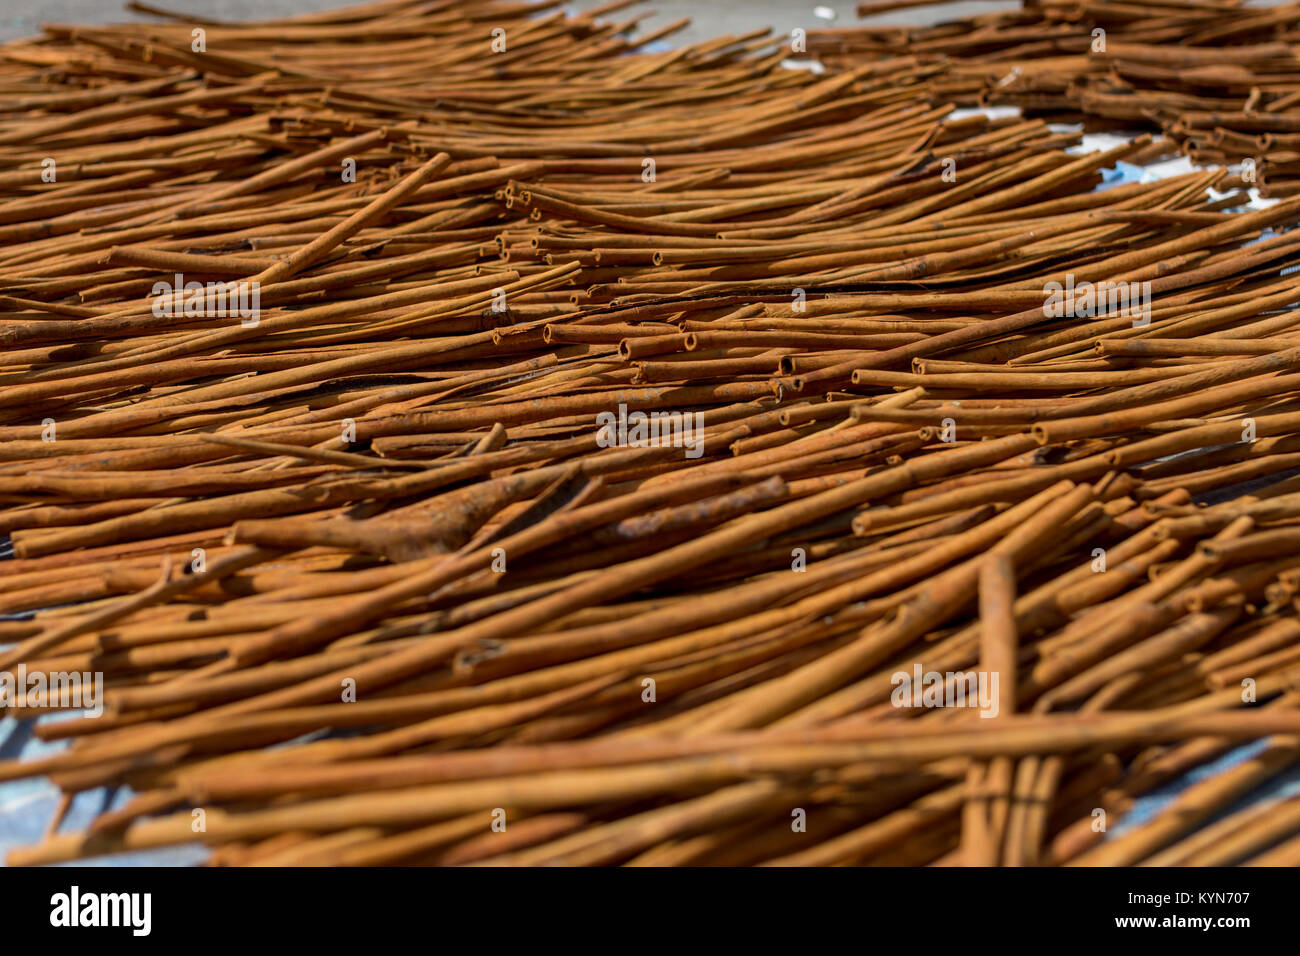 Fresh Cinnamon sticks out in the street drying in the midday sun. Low angle depth of field shot. Stock Photo